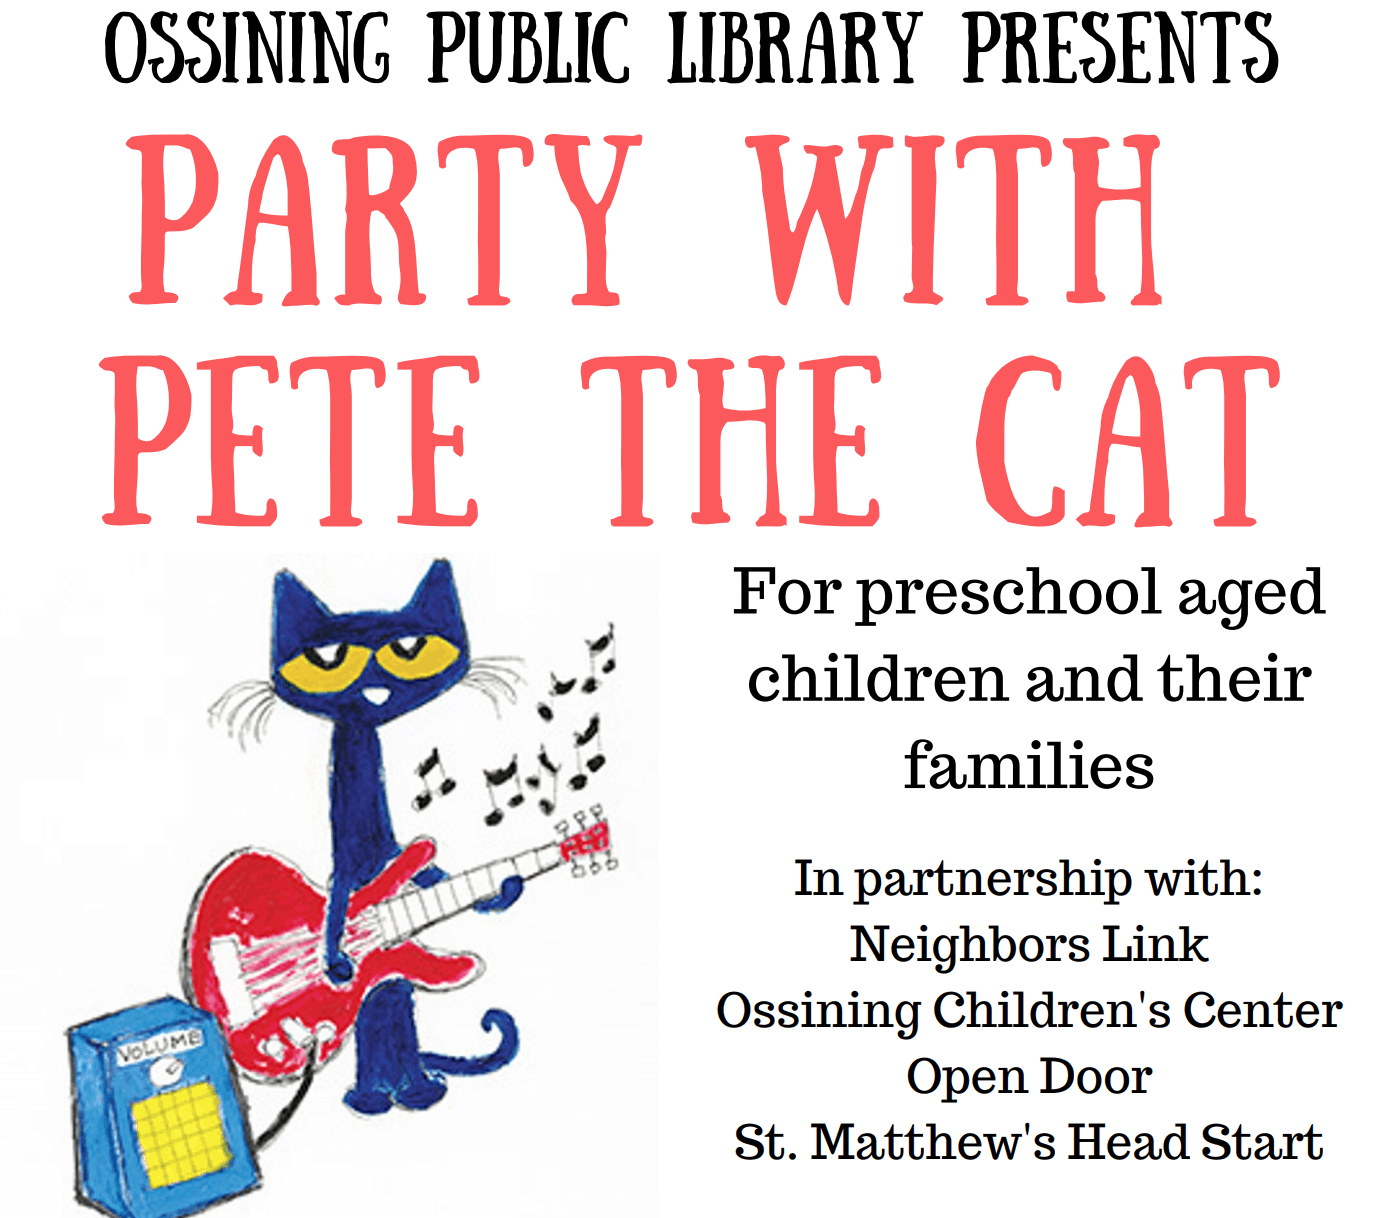 Party with Pete the cat